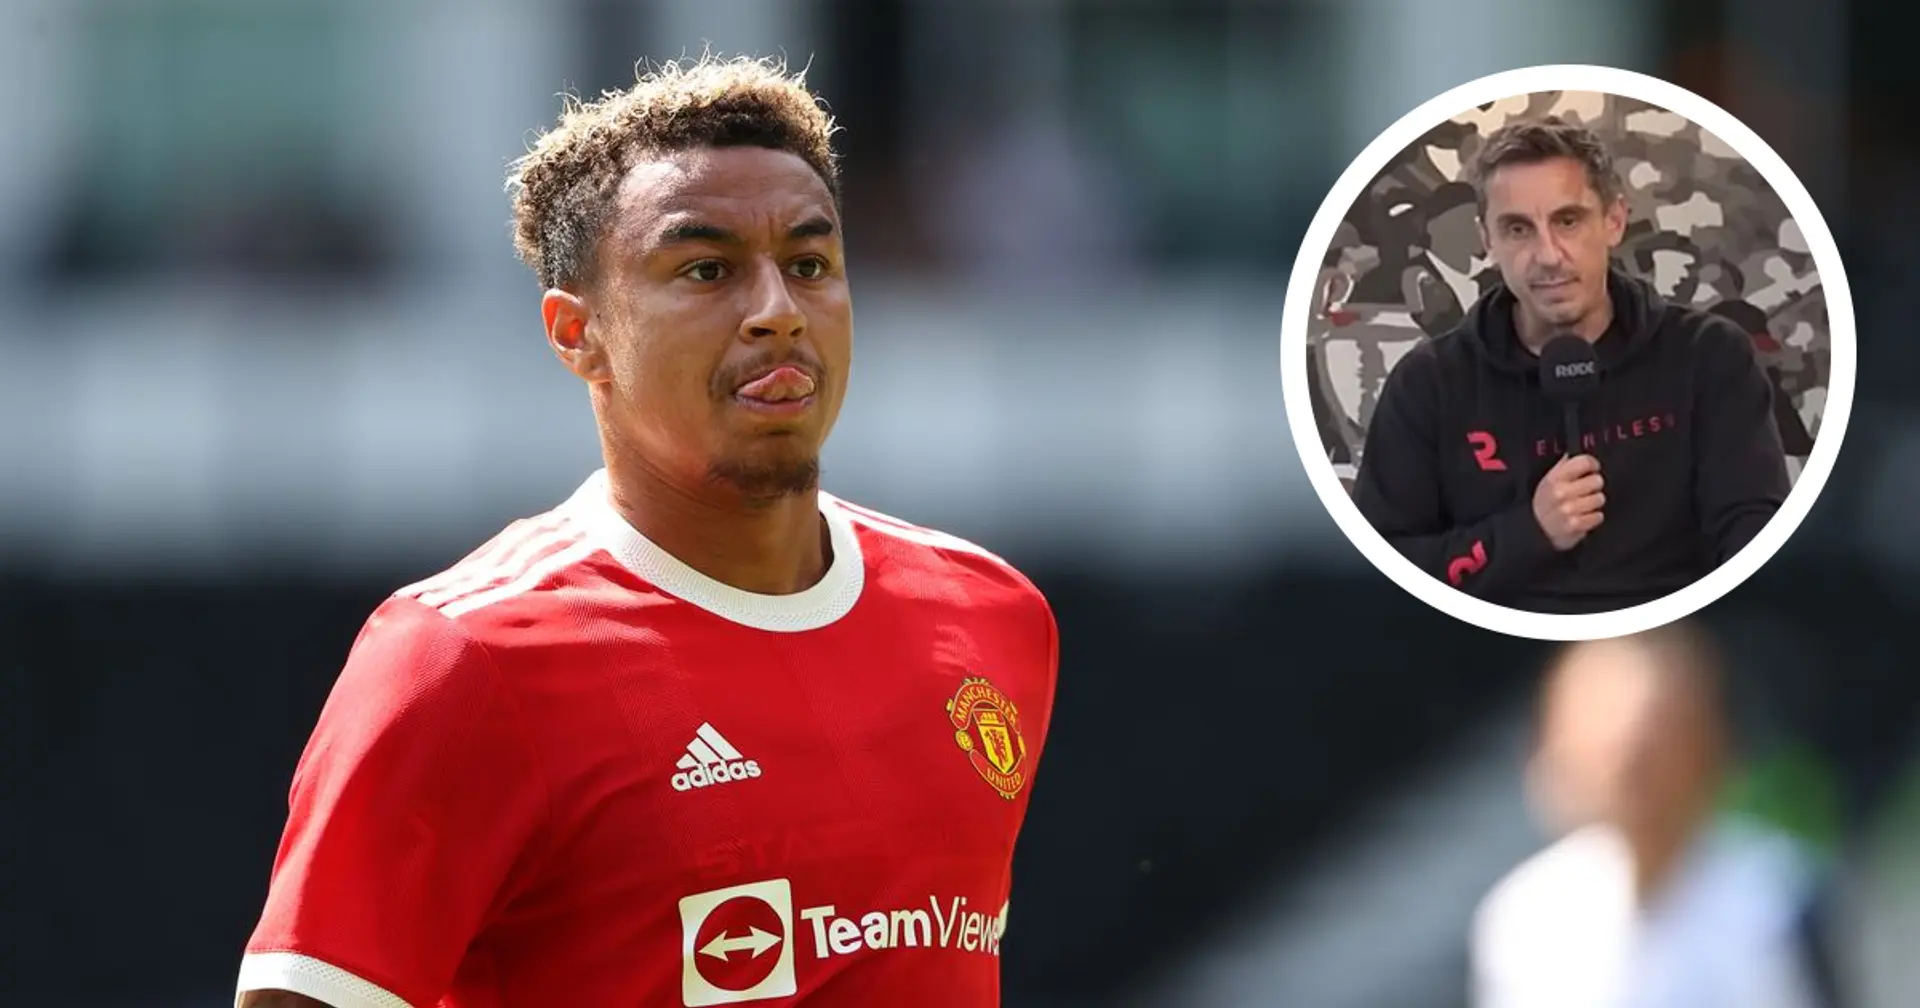 Gary Neville: 'I'm disappointed for Lingard that he's not left Man United'